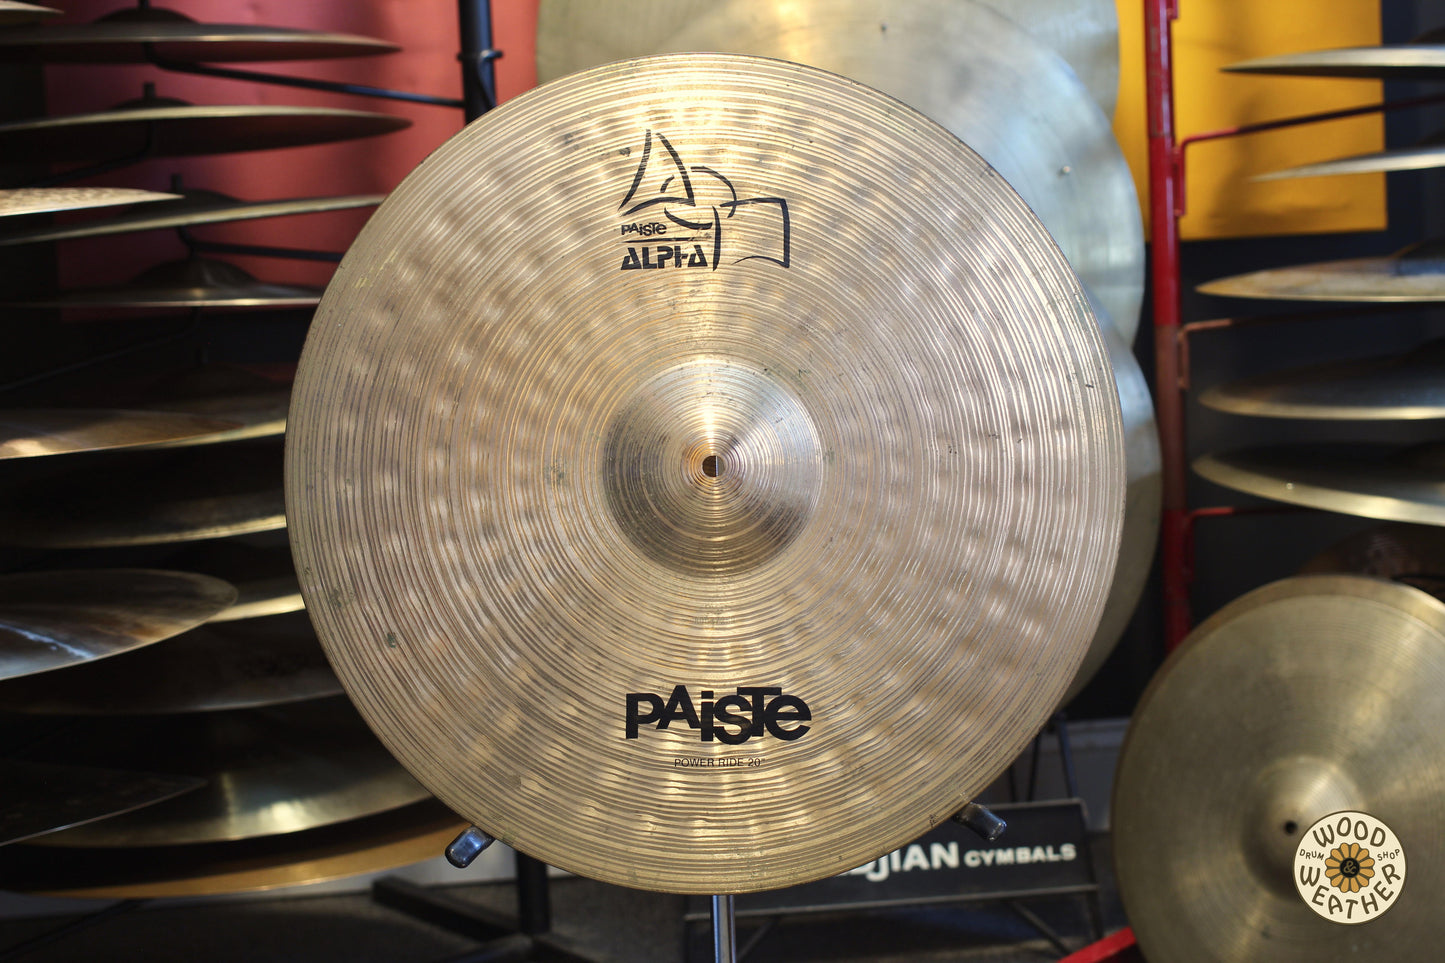 USED Paiste 20" Alpha Power Ride Cymbal 2640g